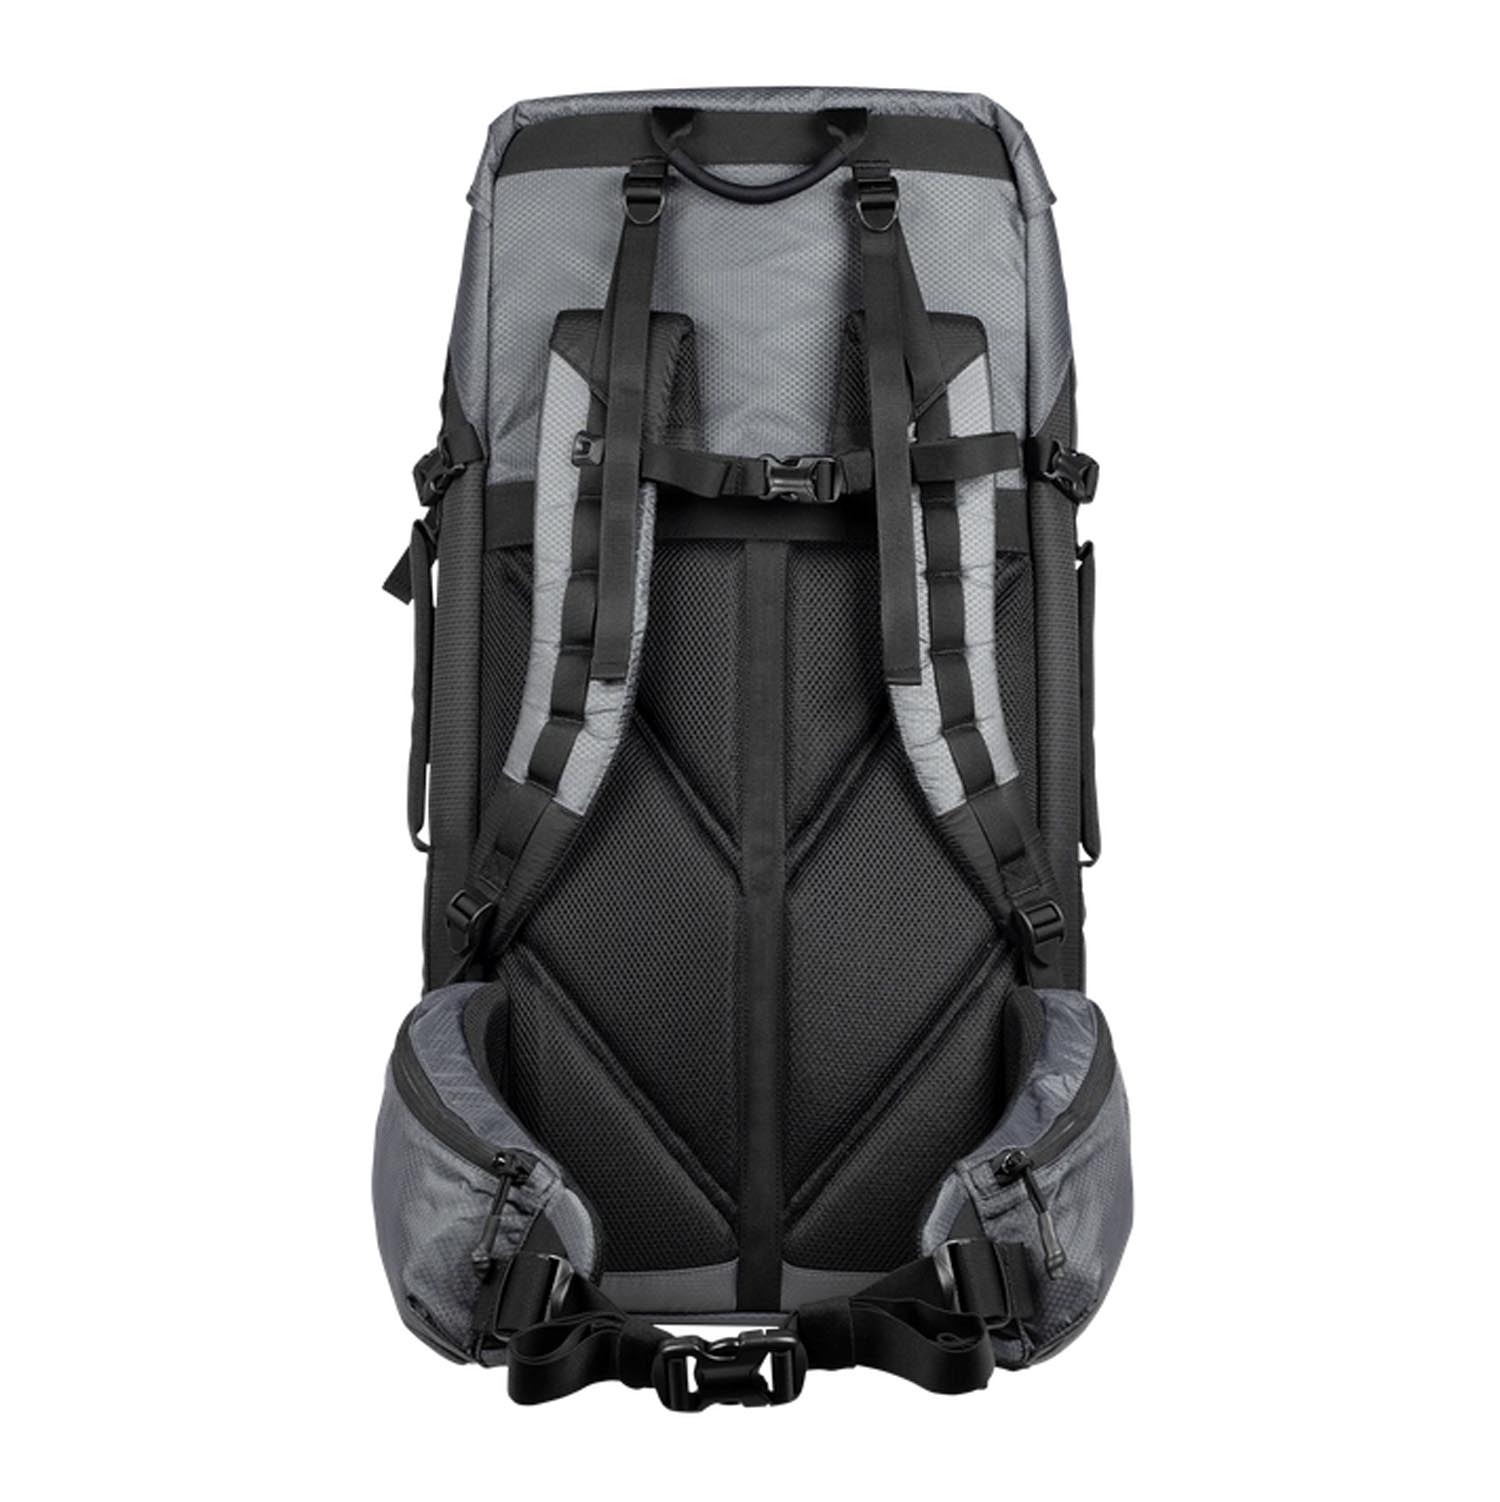 Elite Survival Systems Summit Discreet Rifle Case Backpack